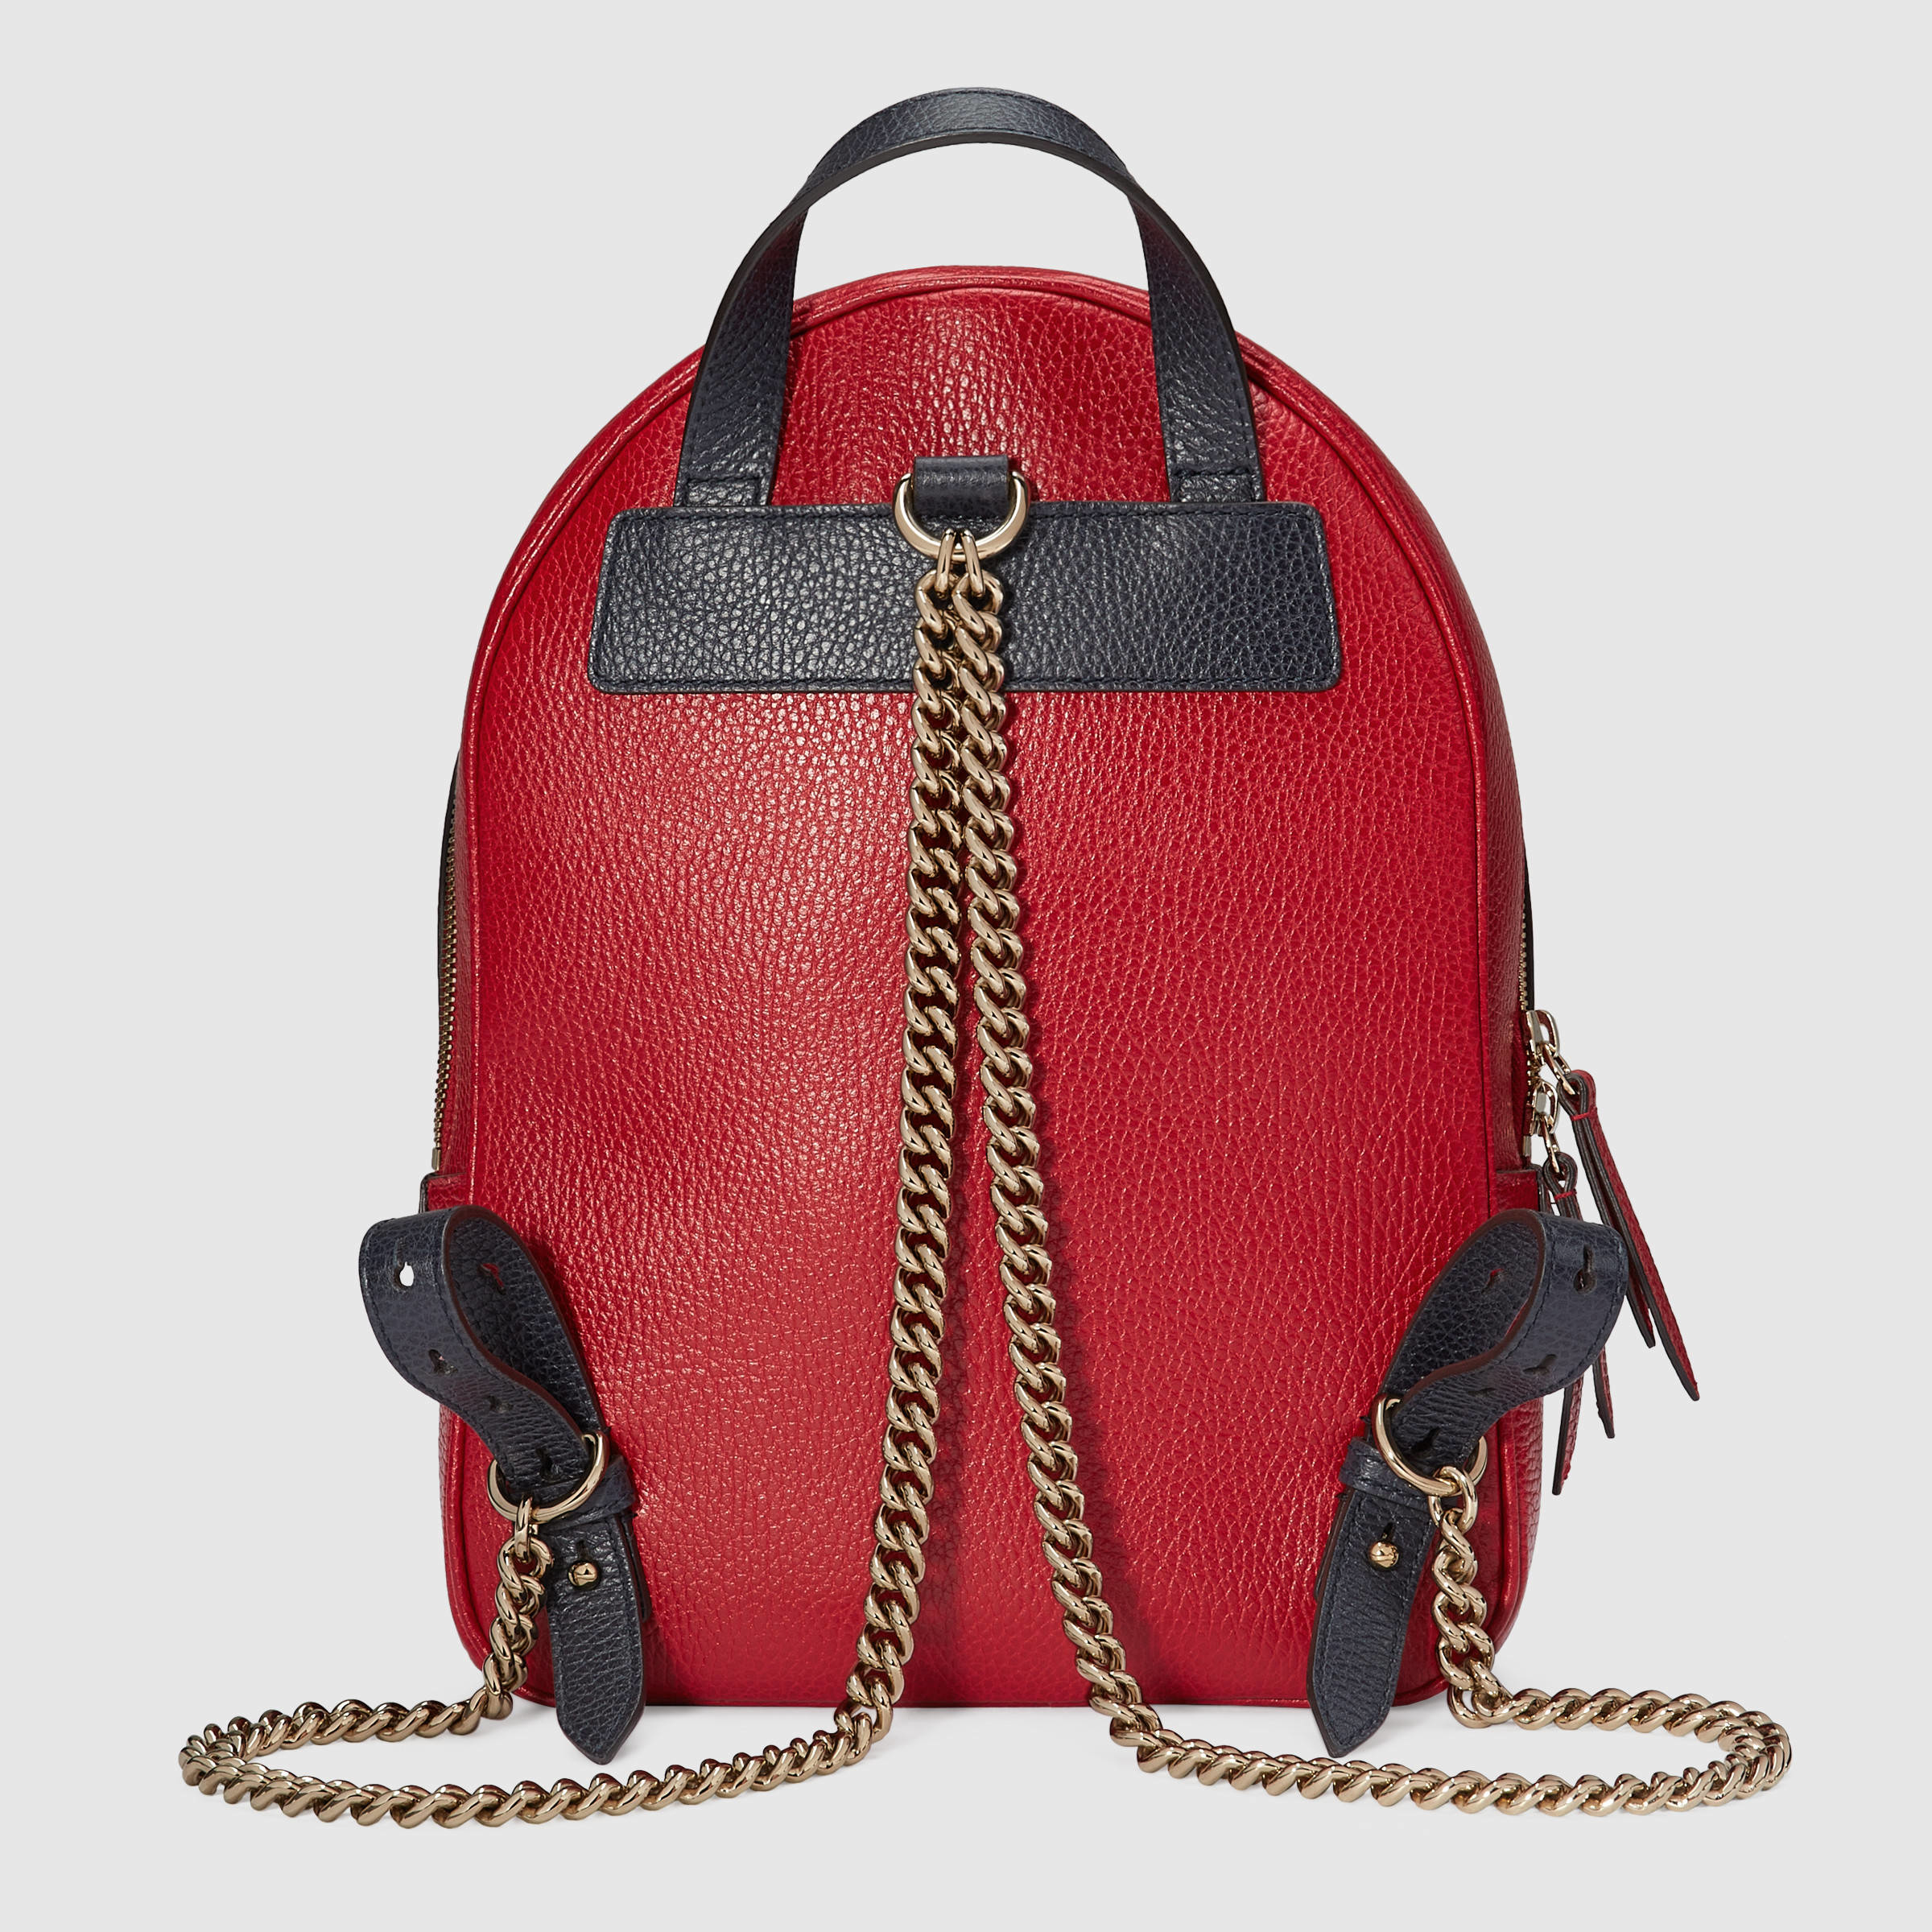 Lyst - Gucci Soho Leather Chain Backpack in Red